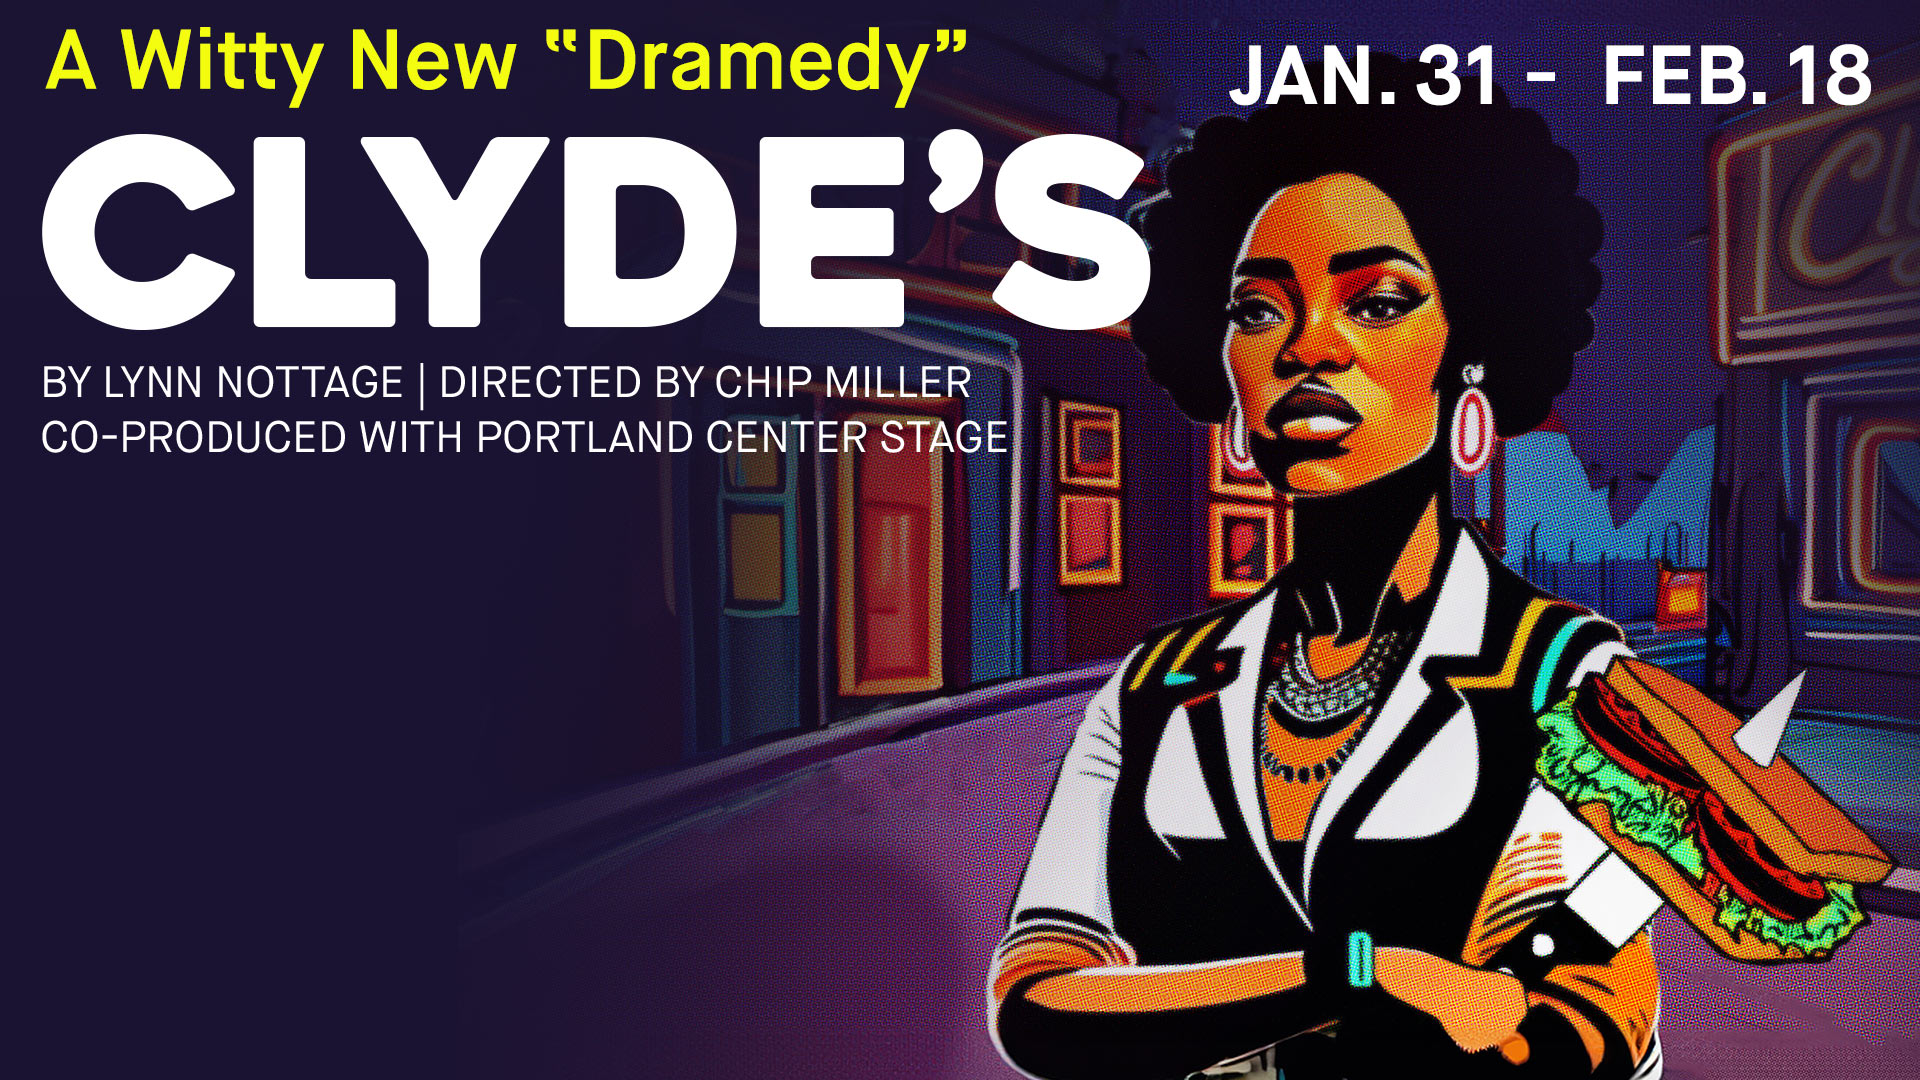 A witty new "dramedy" Clyde's by Lynn Nottage, Directed by Chip Miller, Co-Produced with Portland Center Stage with a woman folding her arms with a sandwich on a knife